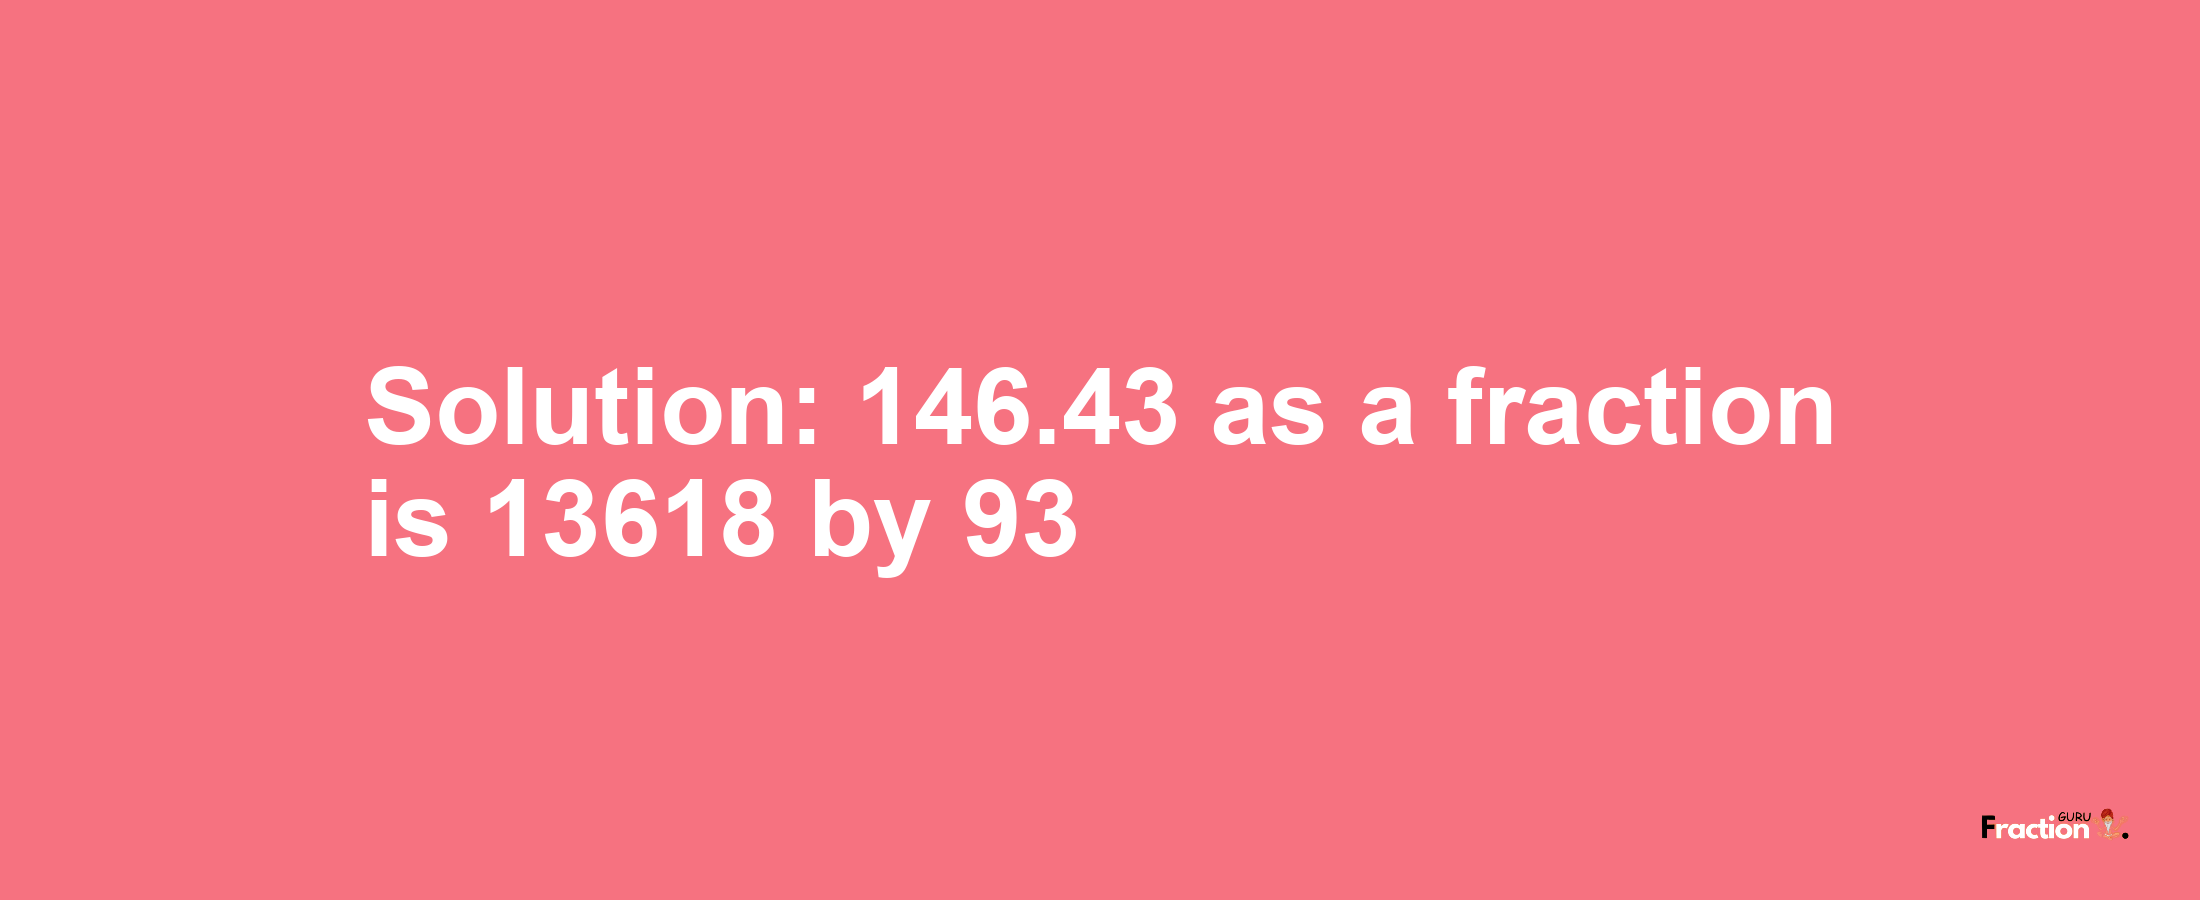 Solution:146.43 as a fraction is 13618/93